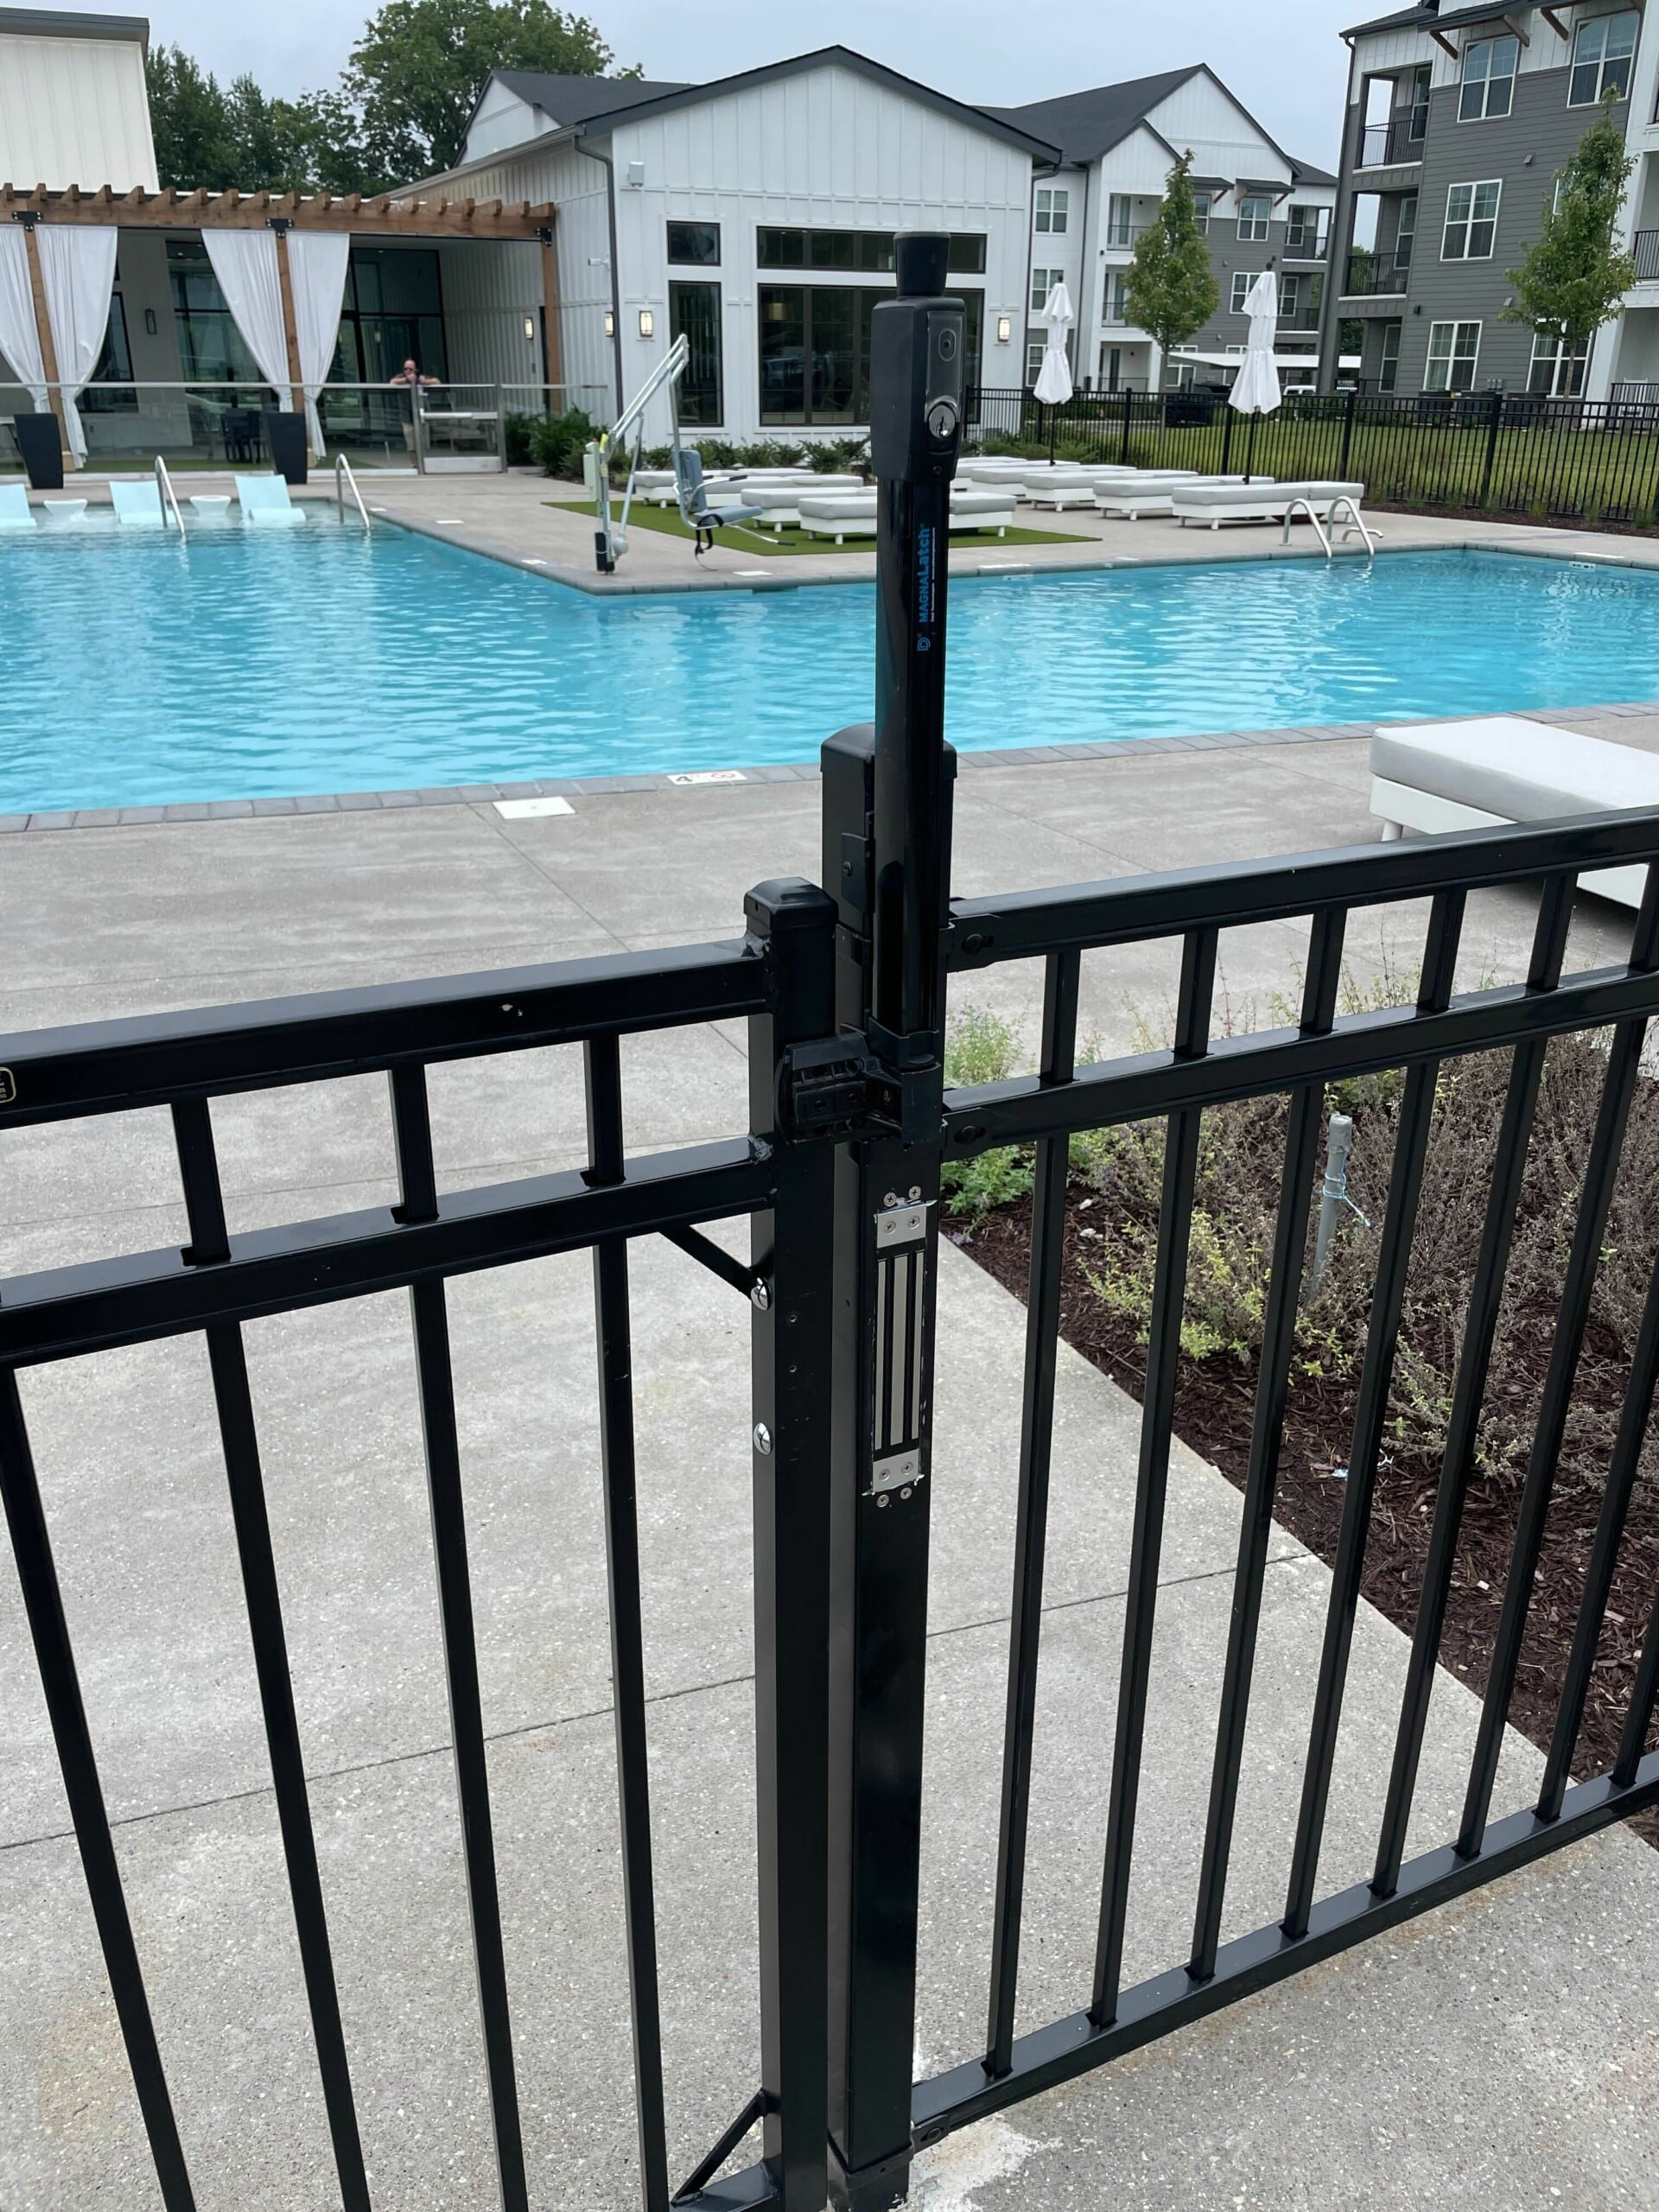 Community pool area with controlled access entry installed by Guardian.